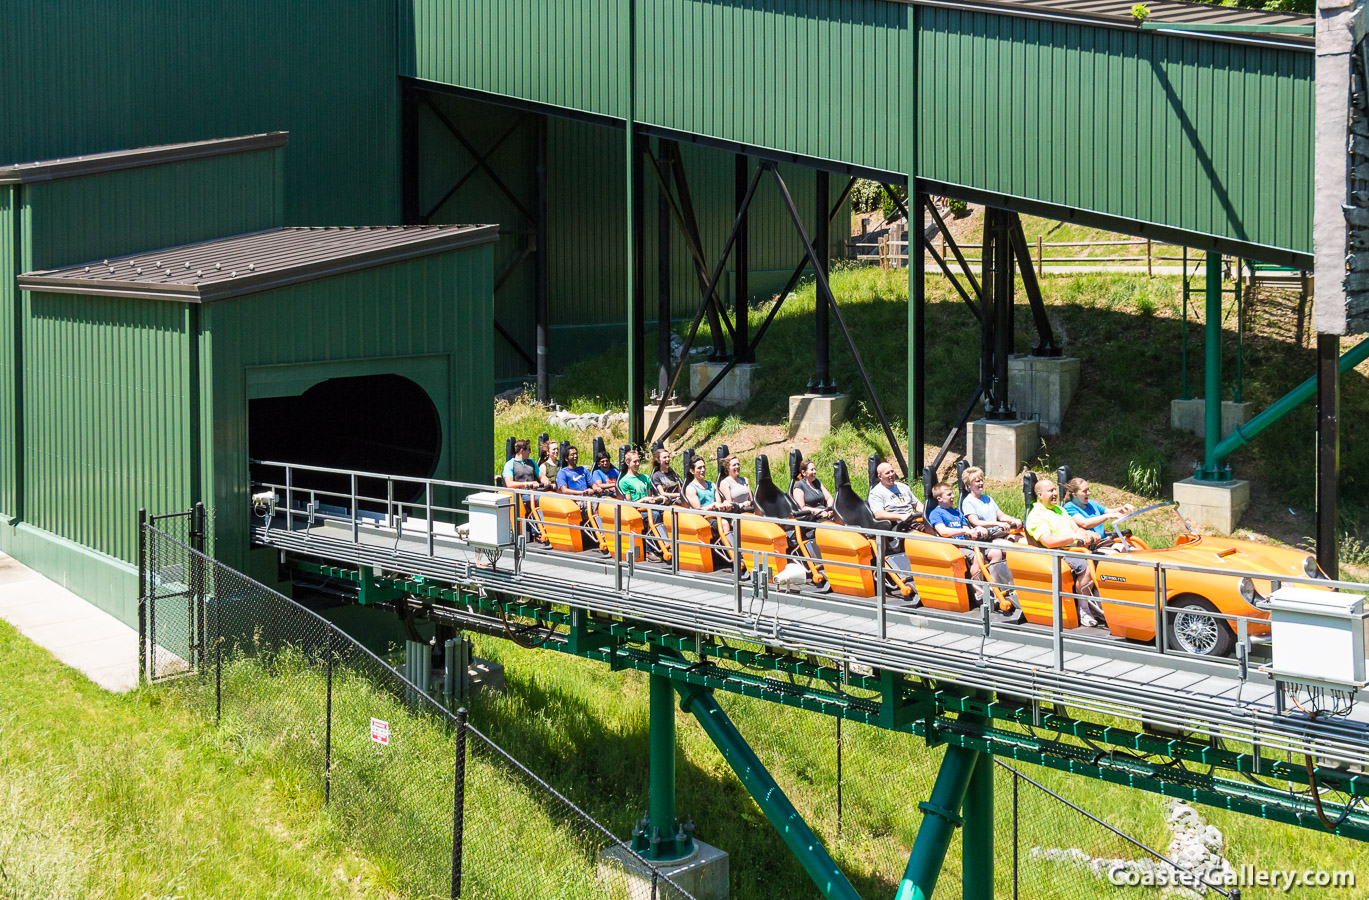 Verbolten roller coaster show building and LSM launches